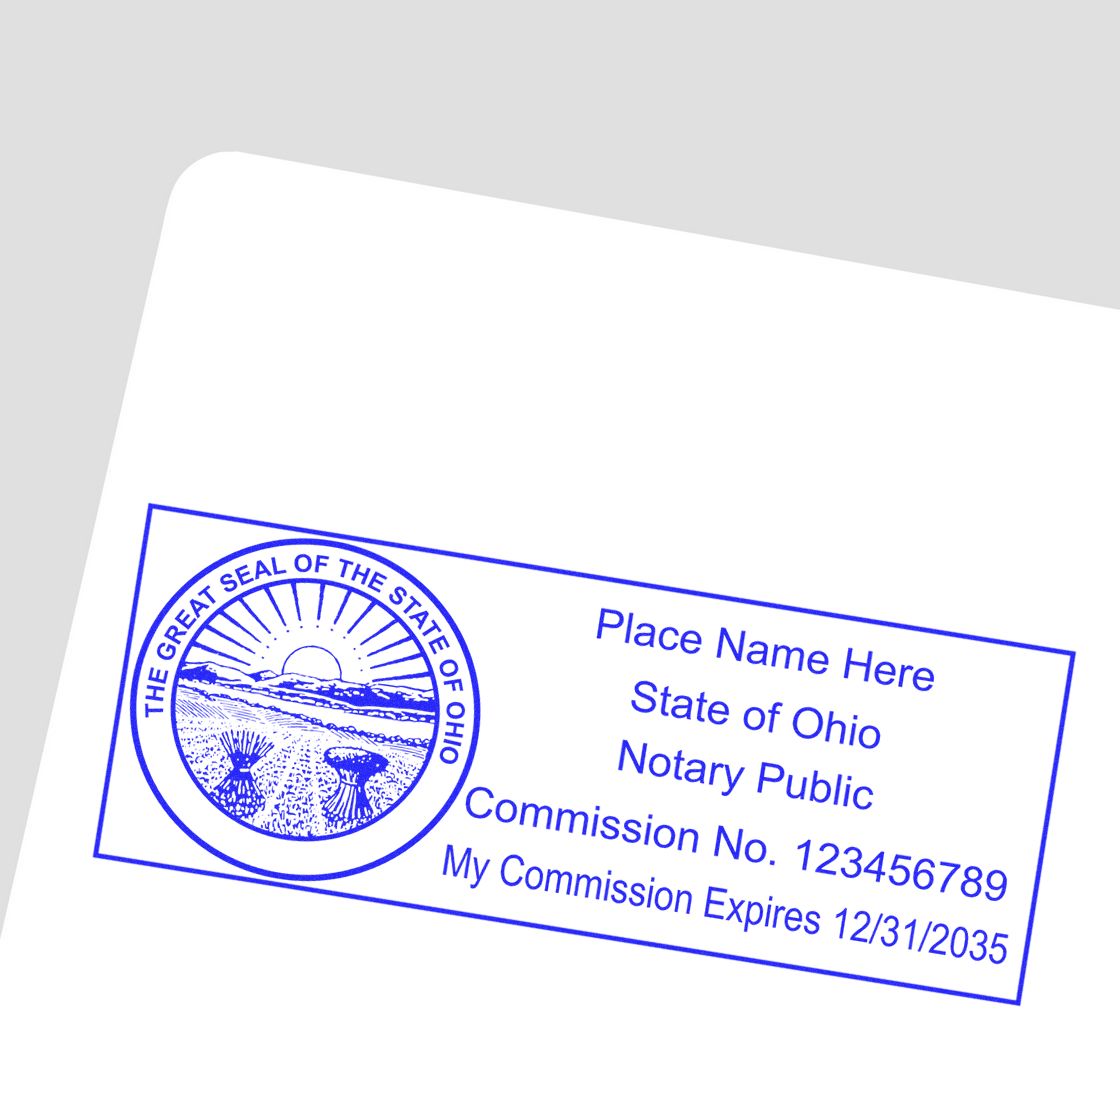 An alternative view of the Heavy-Duty Ohio Rectangular Notary Stamp stamped on a sheet of paper showing the image in use